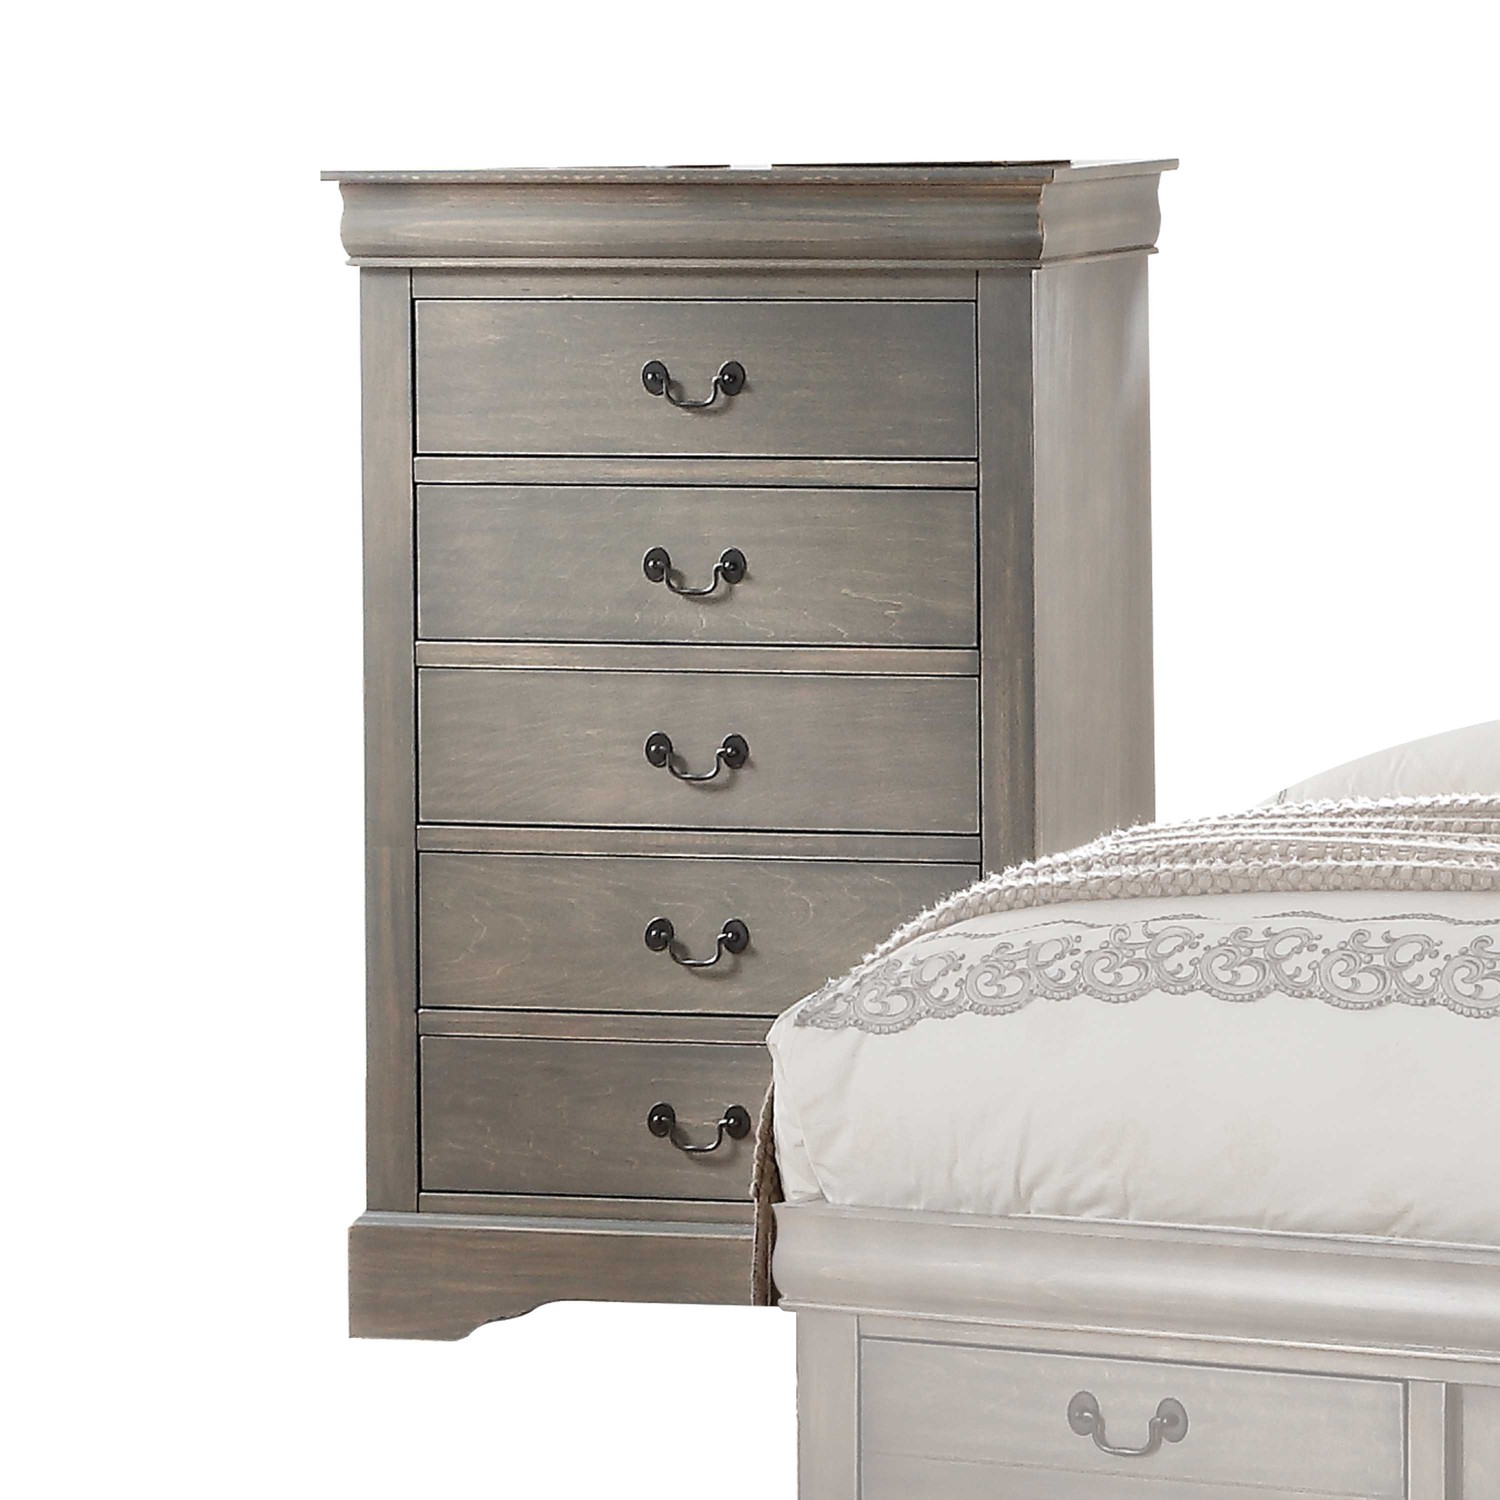 48" Antiqued Gray 5 Drawer Chest Dresse with Brushed Nickel Metal hardware